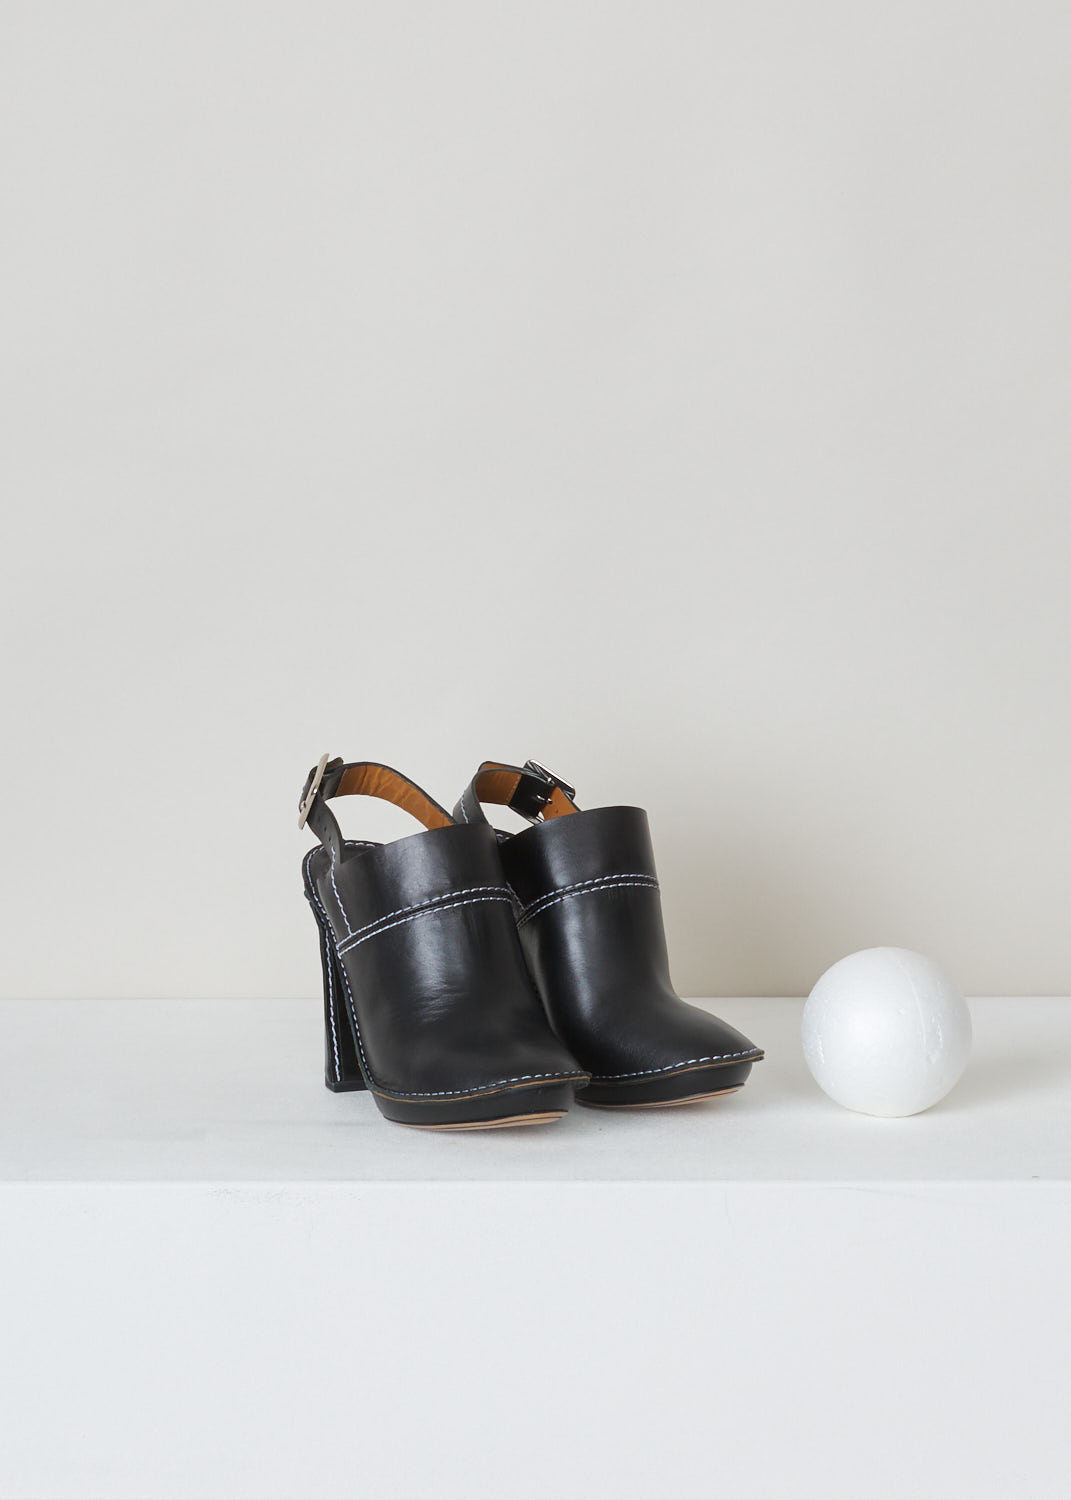 ChloÃ©, Black clog mule with white stitching, CH25041_10ASW_L5L7_999_black, white, front, These black clog mules feature a round toe, slip-on design and a buckle to tie around anckle. The contrasting white stitching adds charm to these clog mules.

Heel height: 11,5 cm / 4.33 inch